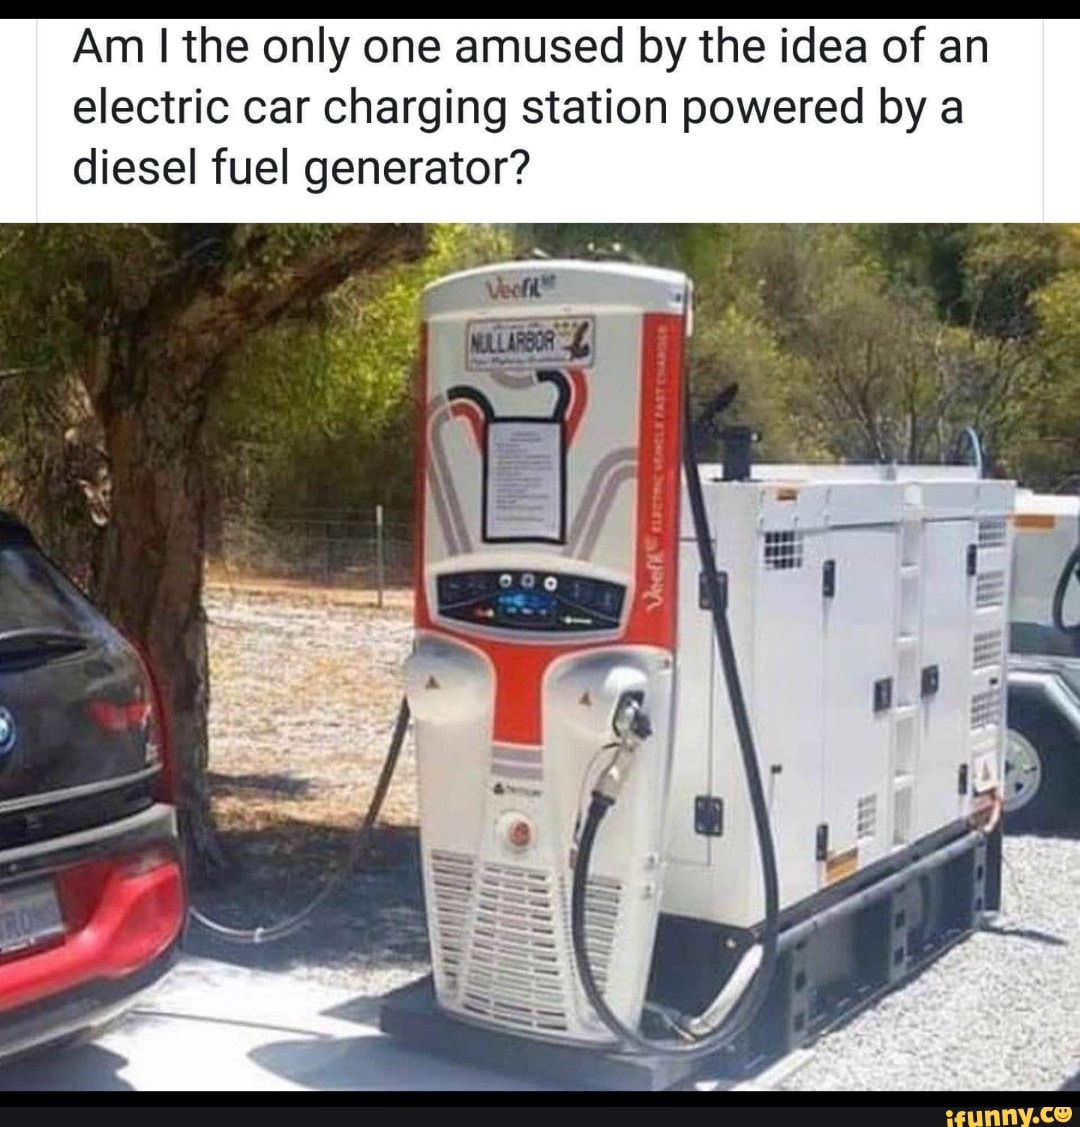 Am I the only one amused by the idea of an electric car charging